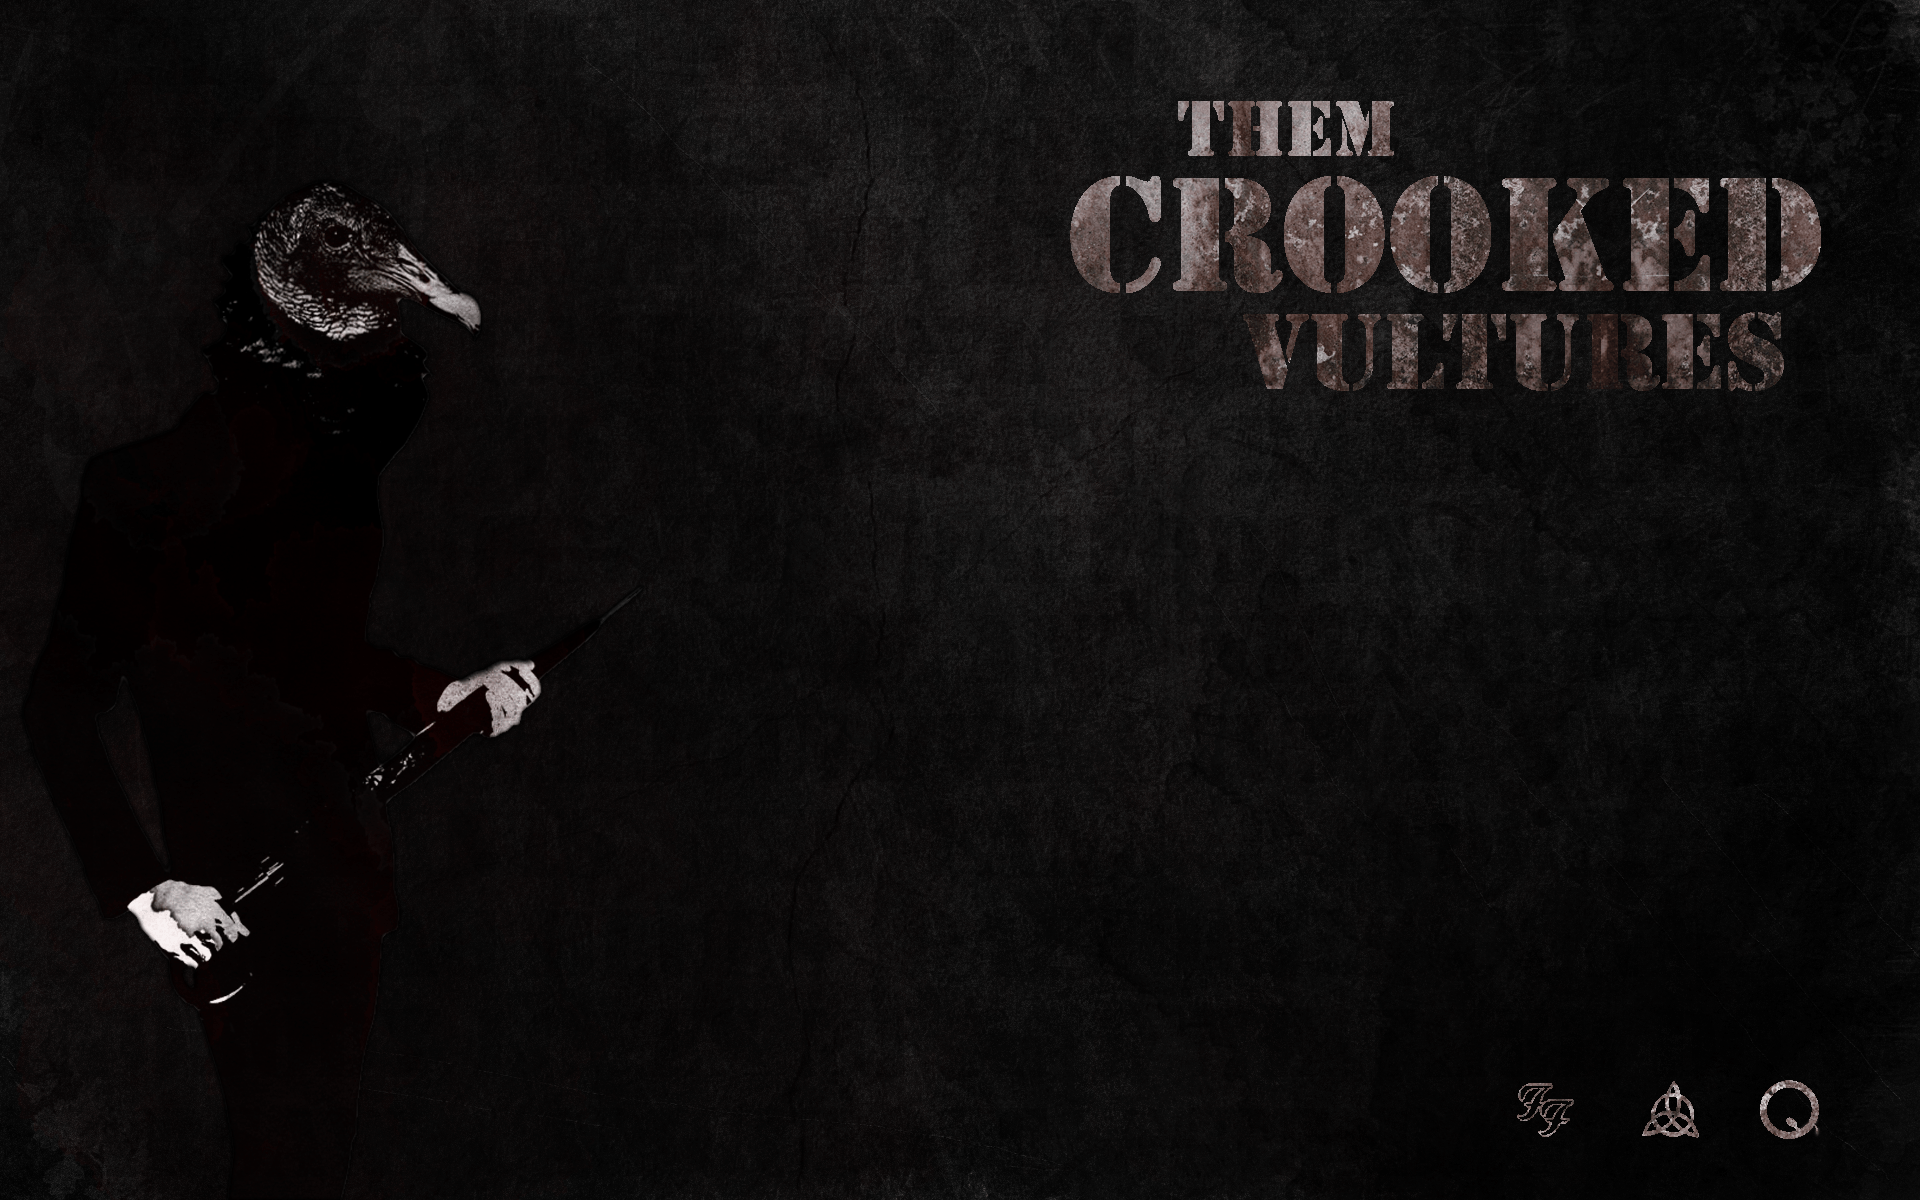 Them Crooked Vultures Wallpapers